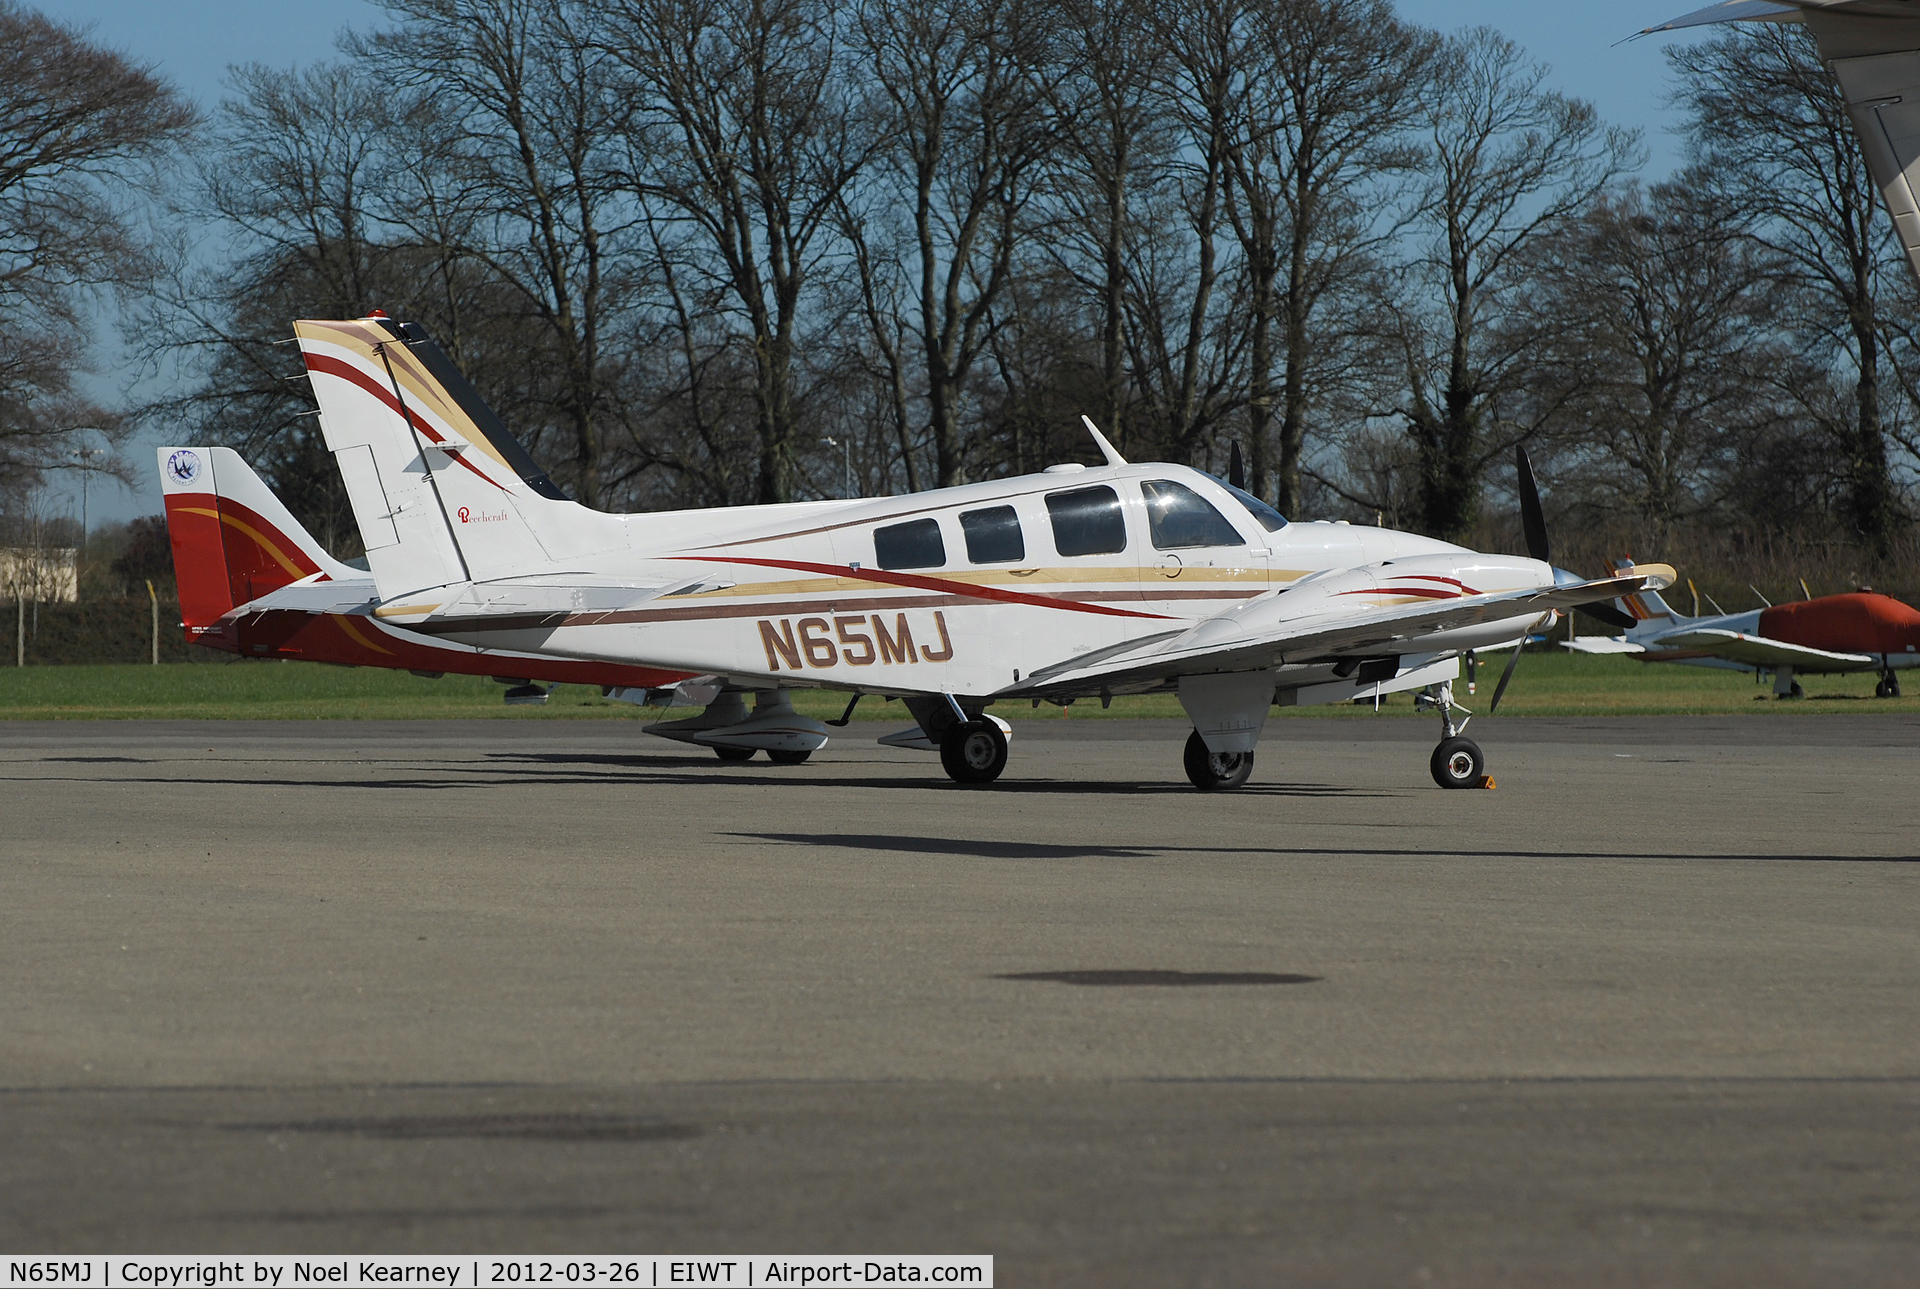 N65MJ, 1985 Beech 58P Baron C/N TJ-487, Seen parked on the apron at Weston.